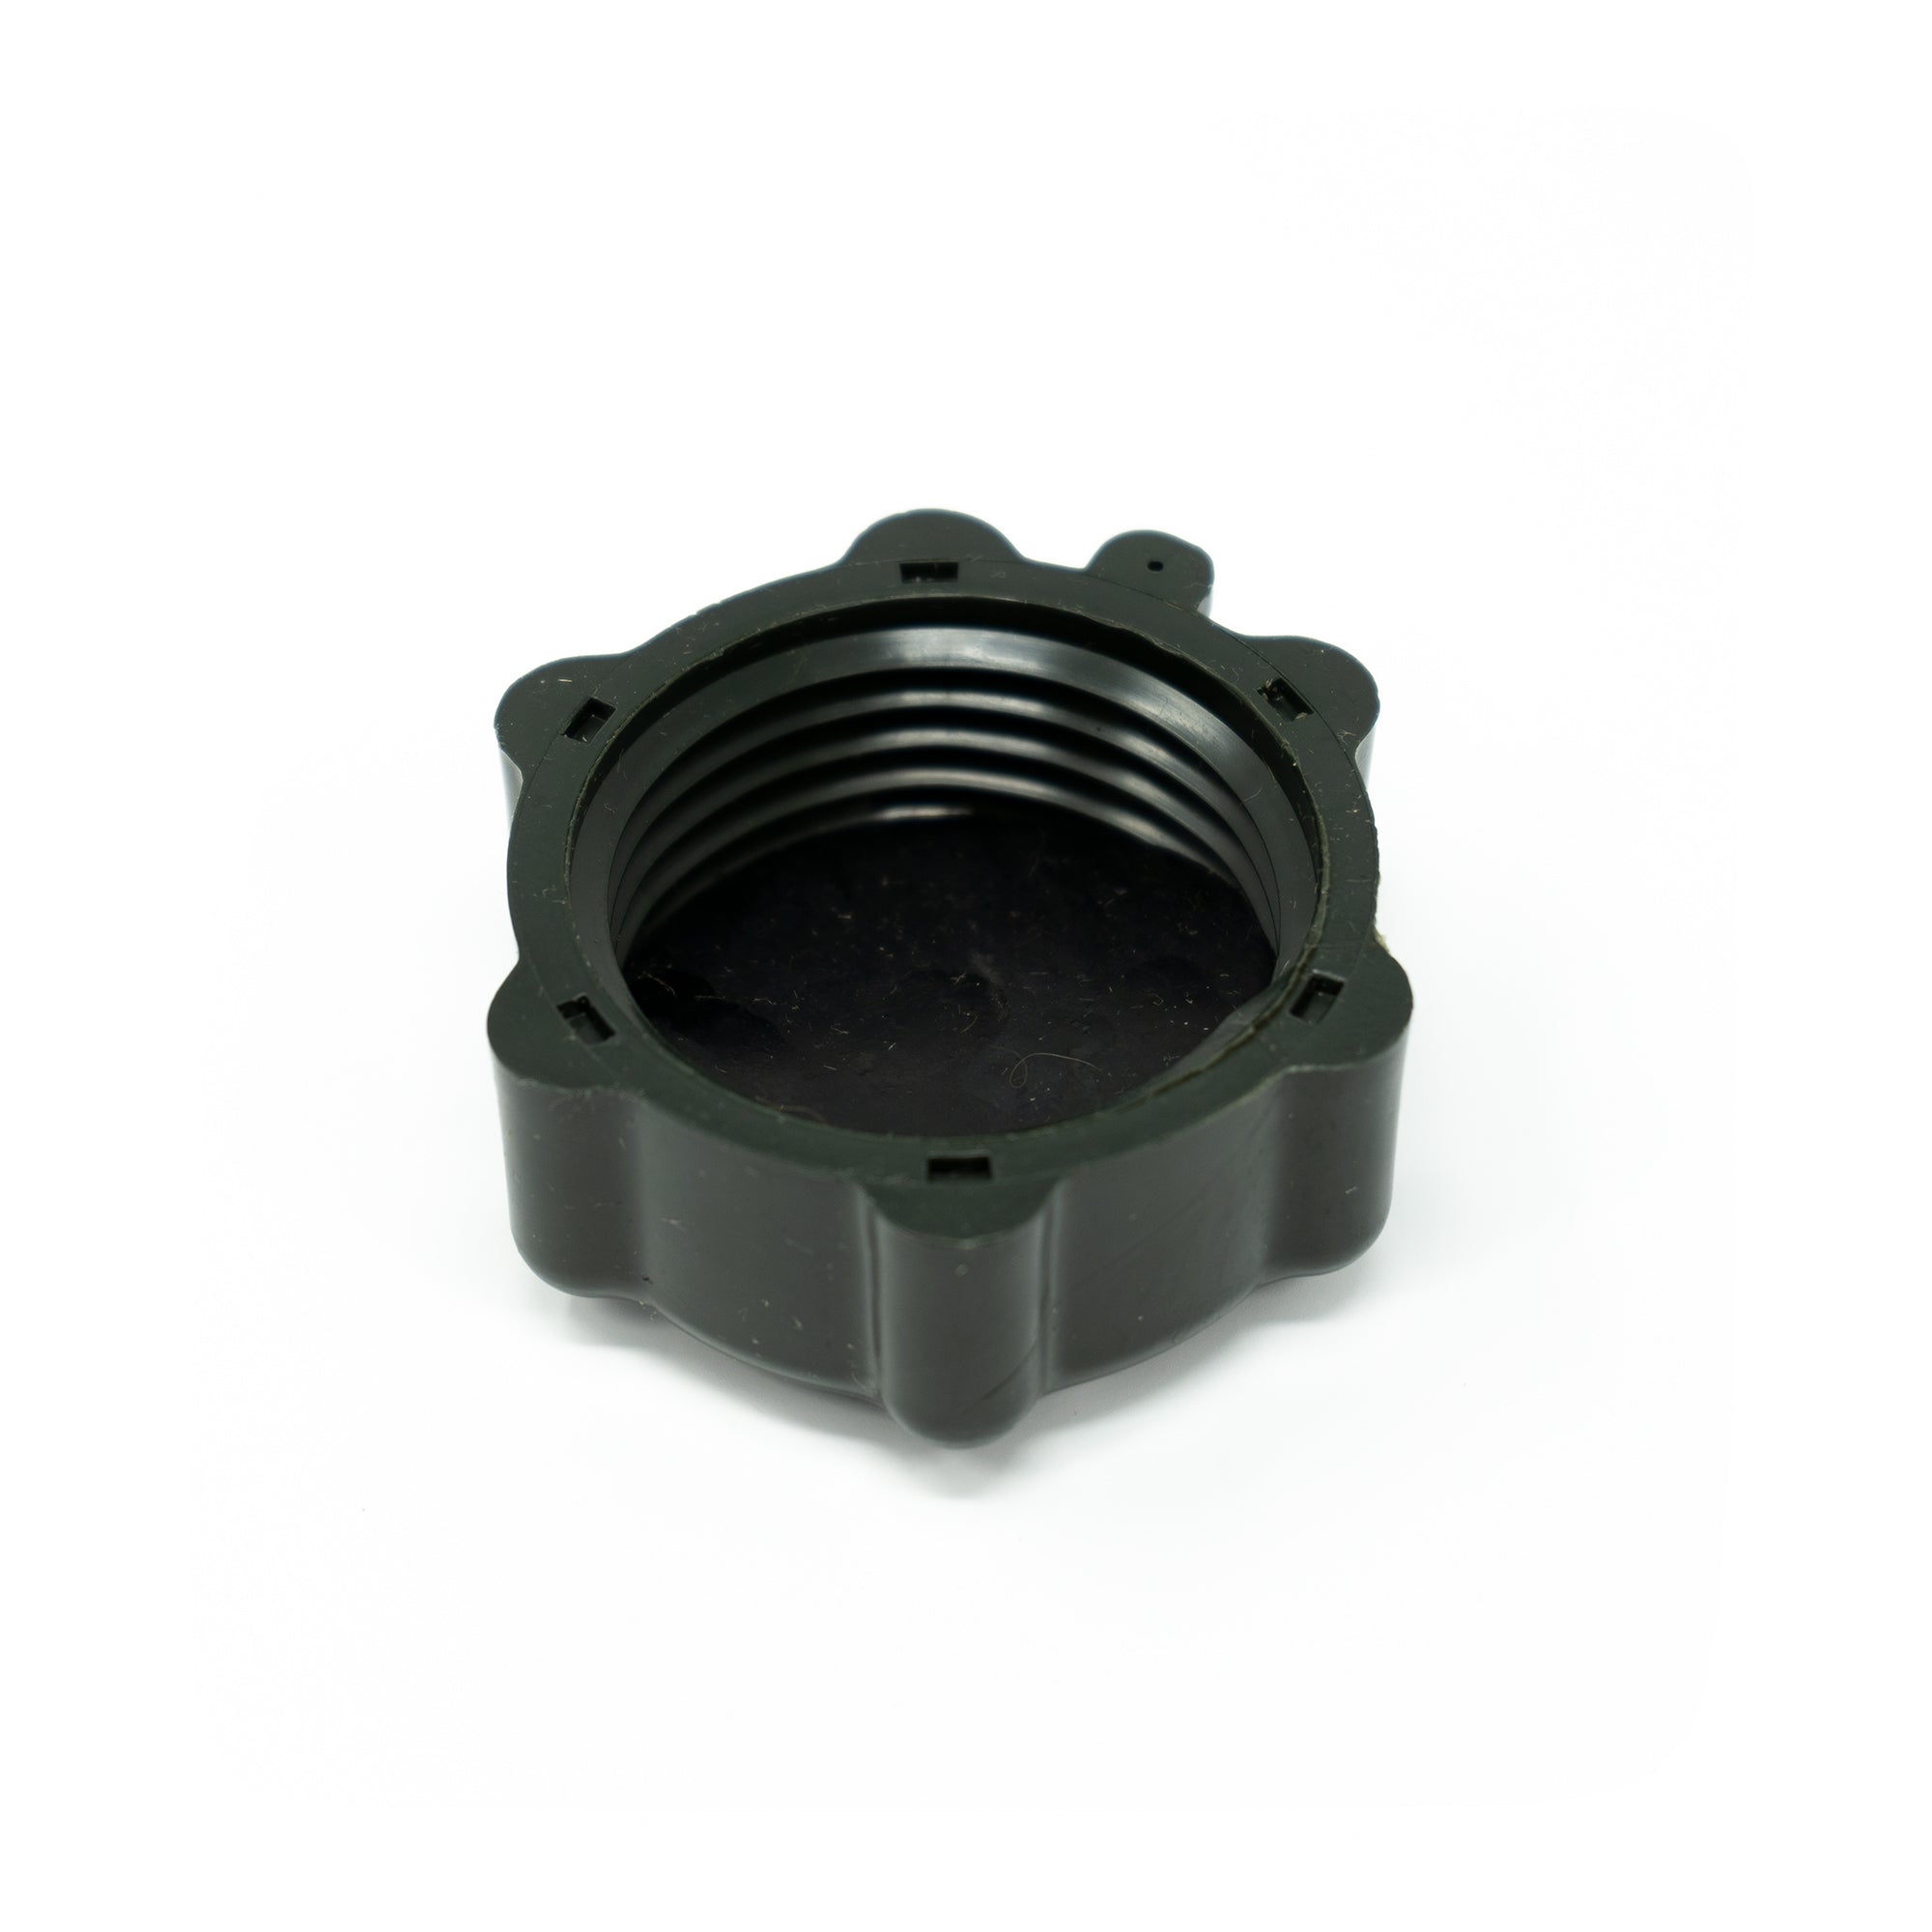 Replacement Fluid Canister Cap